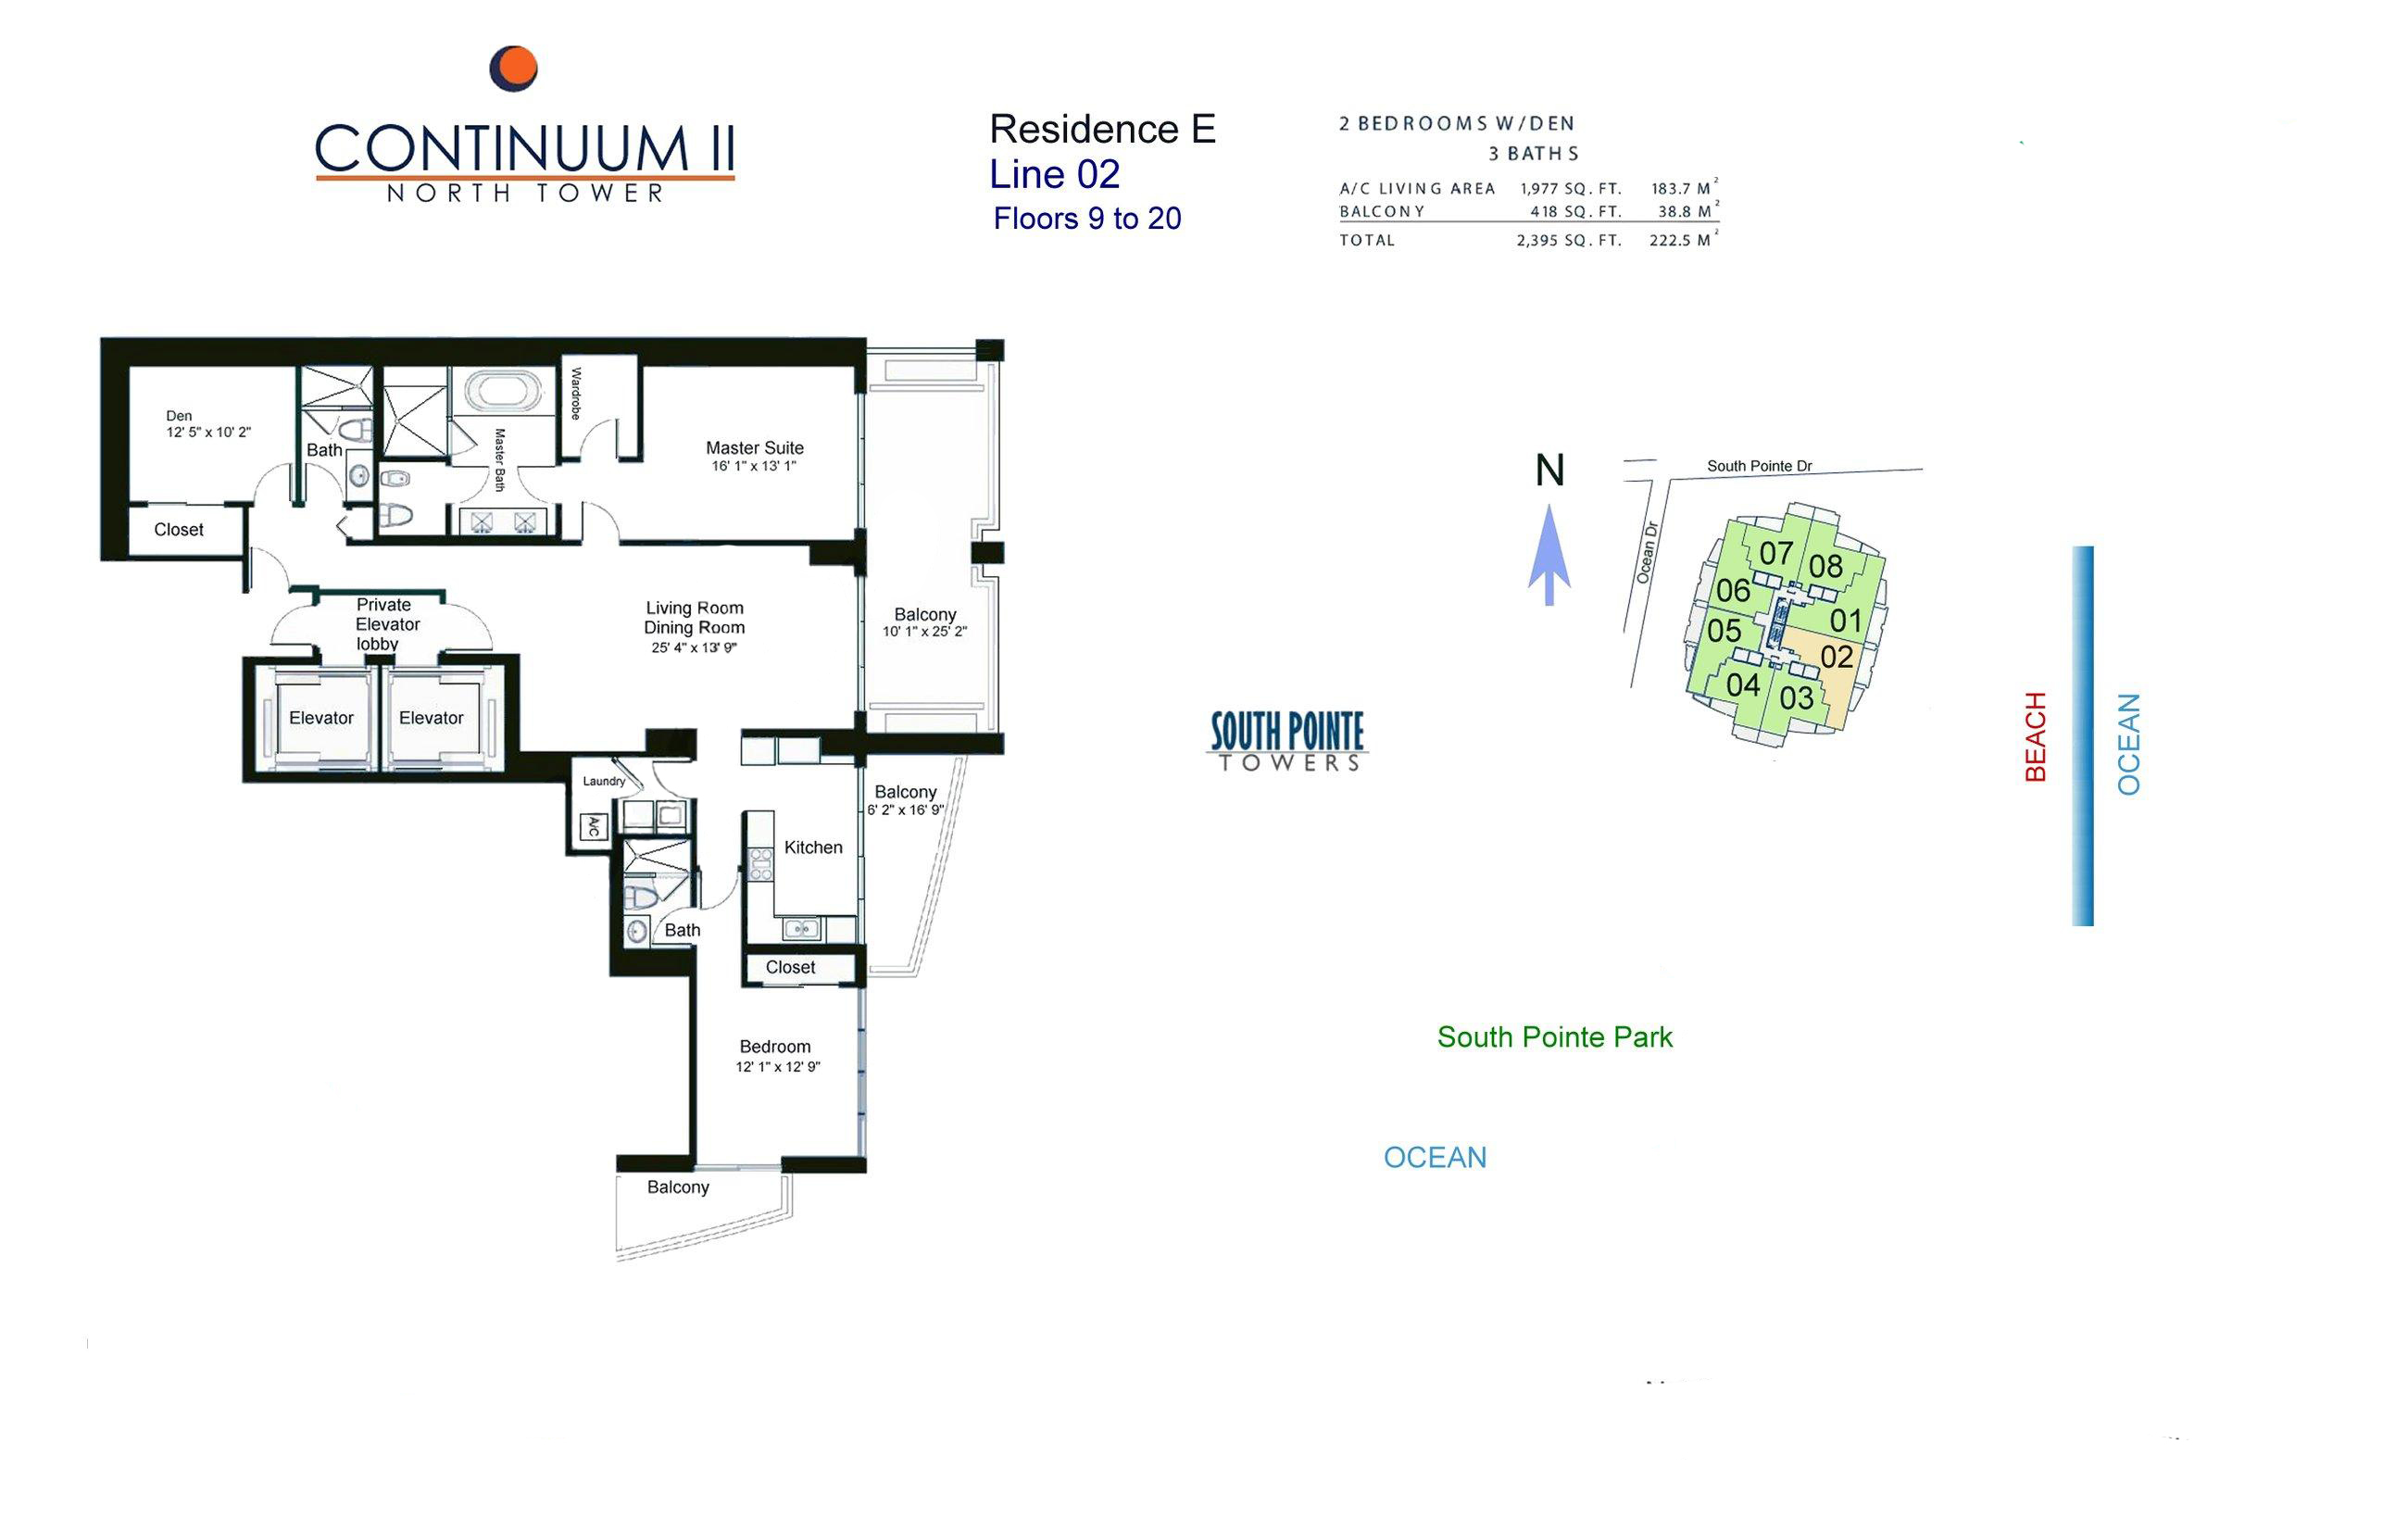 Continuum North Tower Residence E Line 02